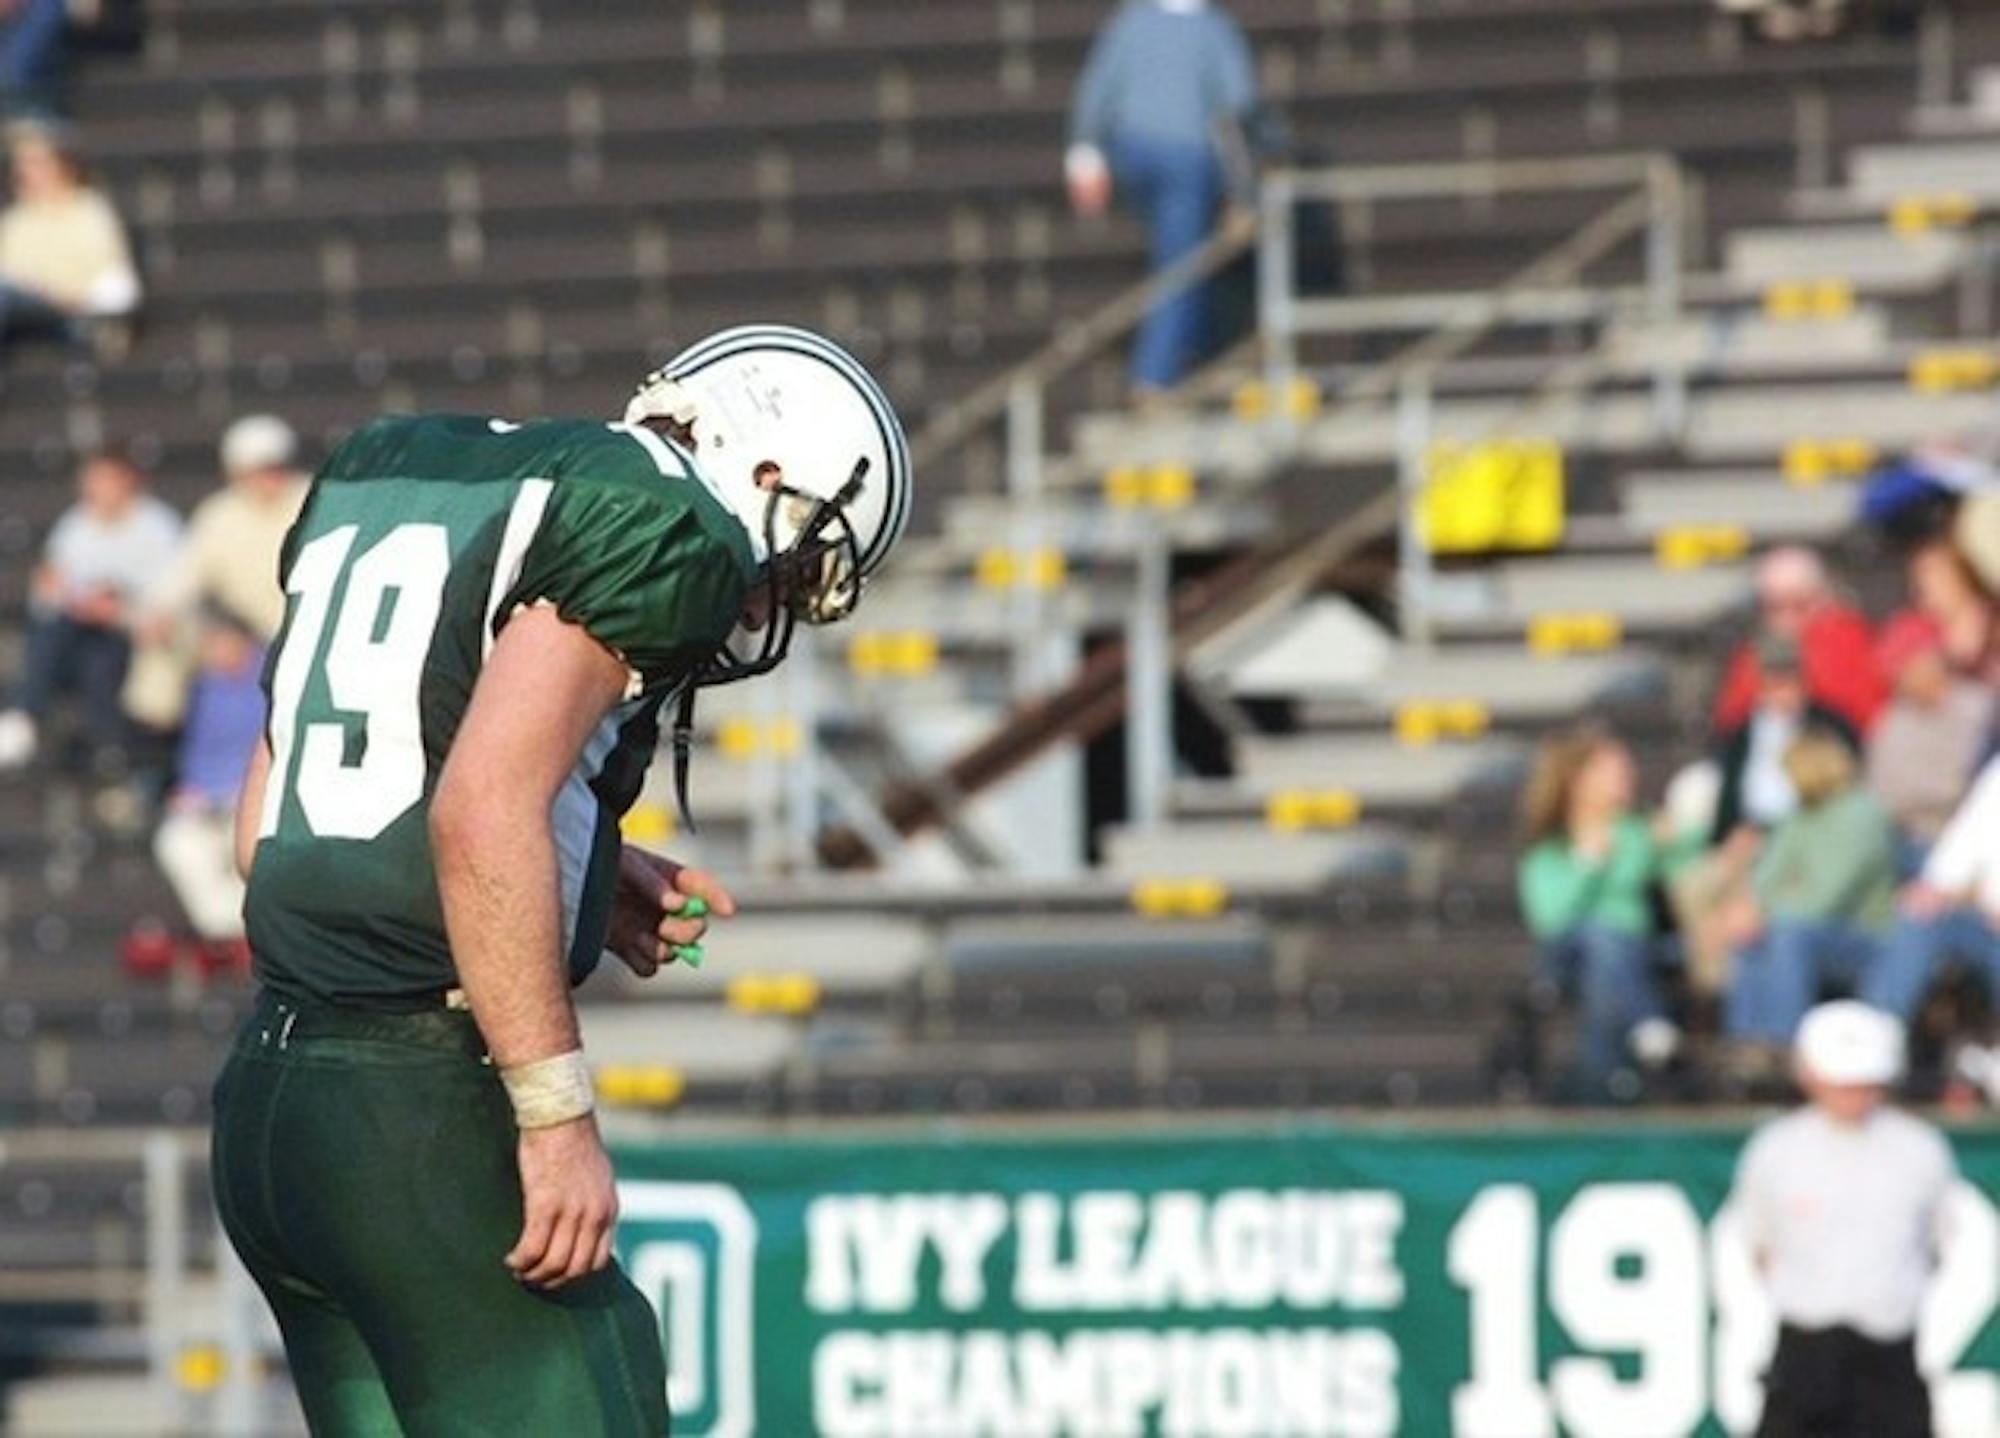 Josh Cohen '09 won't throw passes until the spring, after being suspended due to poor academic performance this past year. During the 2005 season, he played strongly on the field and quickly earned the starting quarterback role.